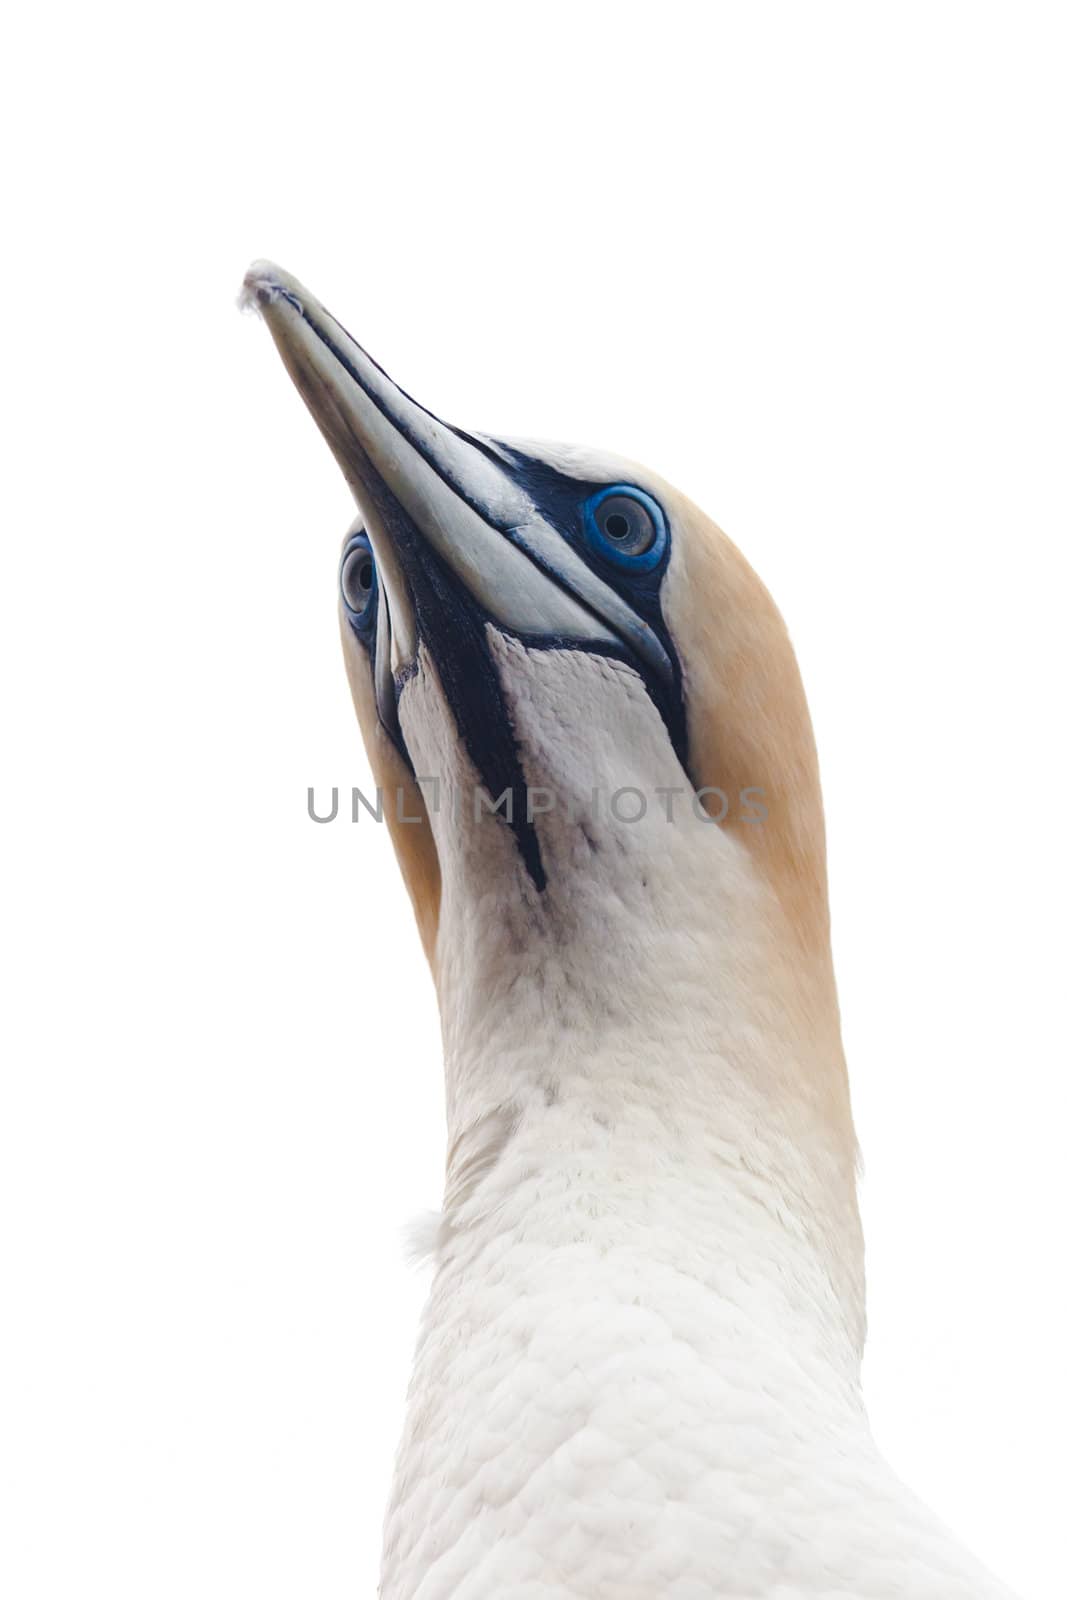 Portrait head-shot of gannet isolated on white by PiLens